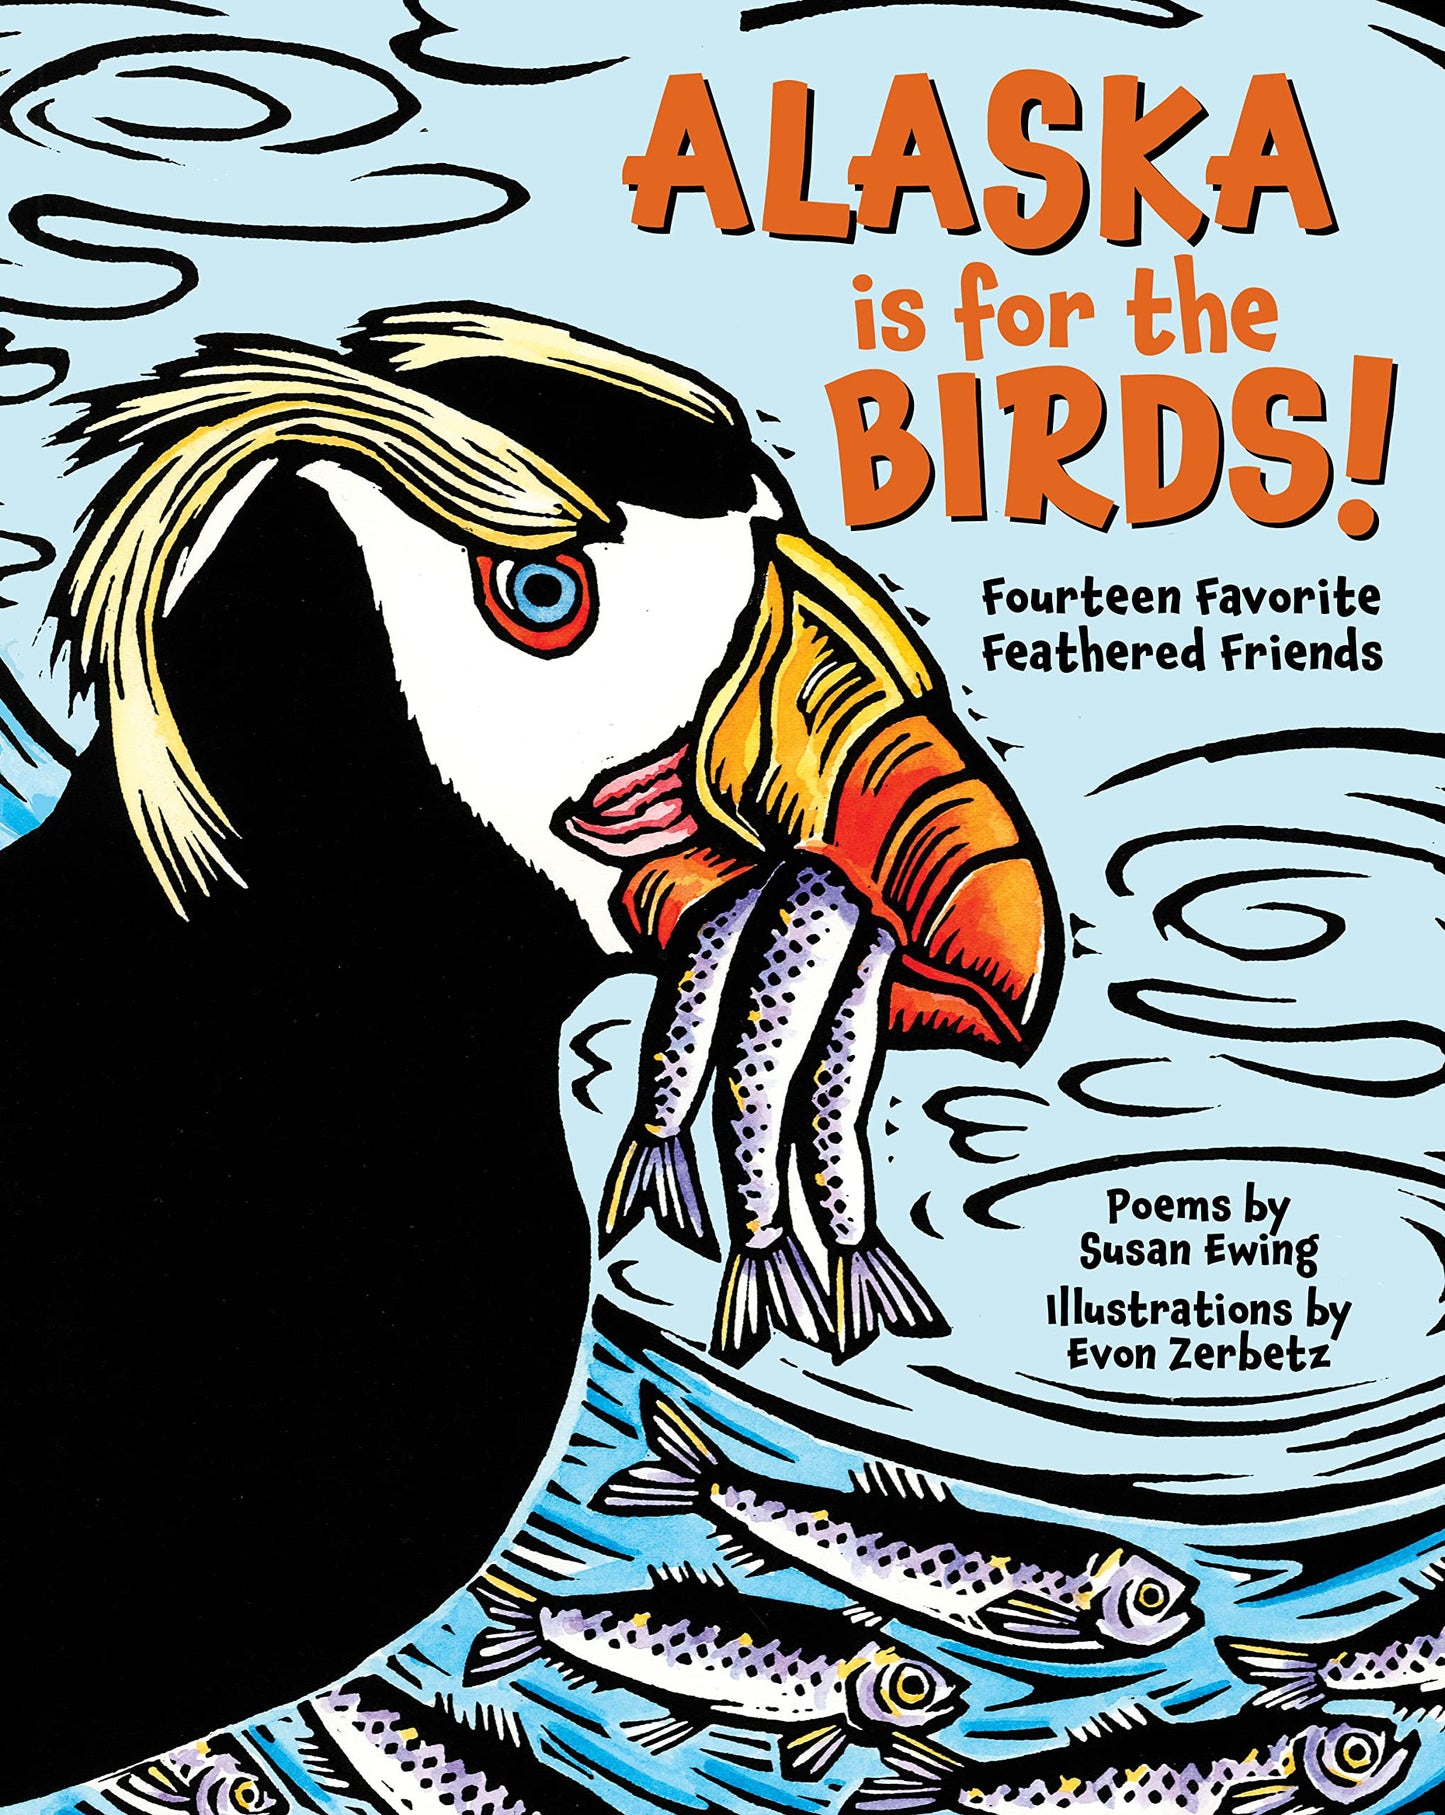 Alaska is for the Birds! by Susan Ewing and Evon Zerbetz